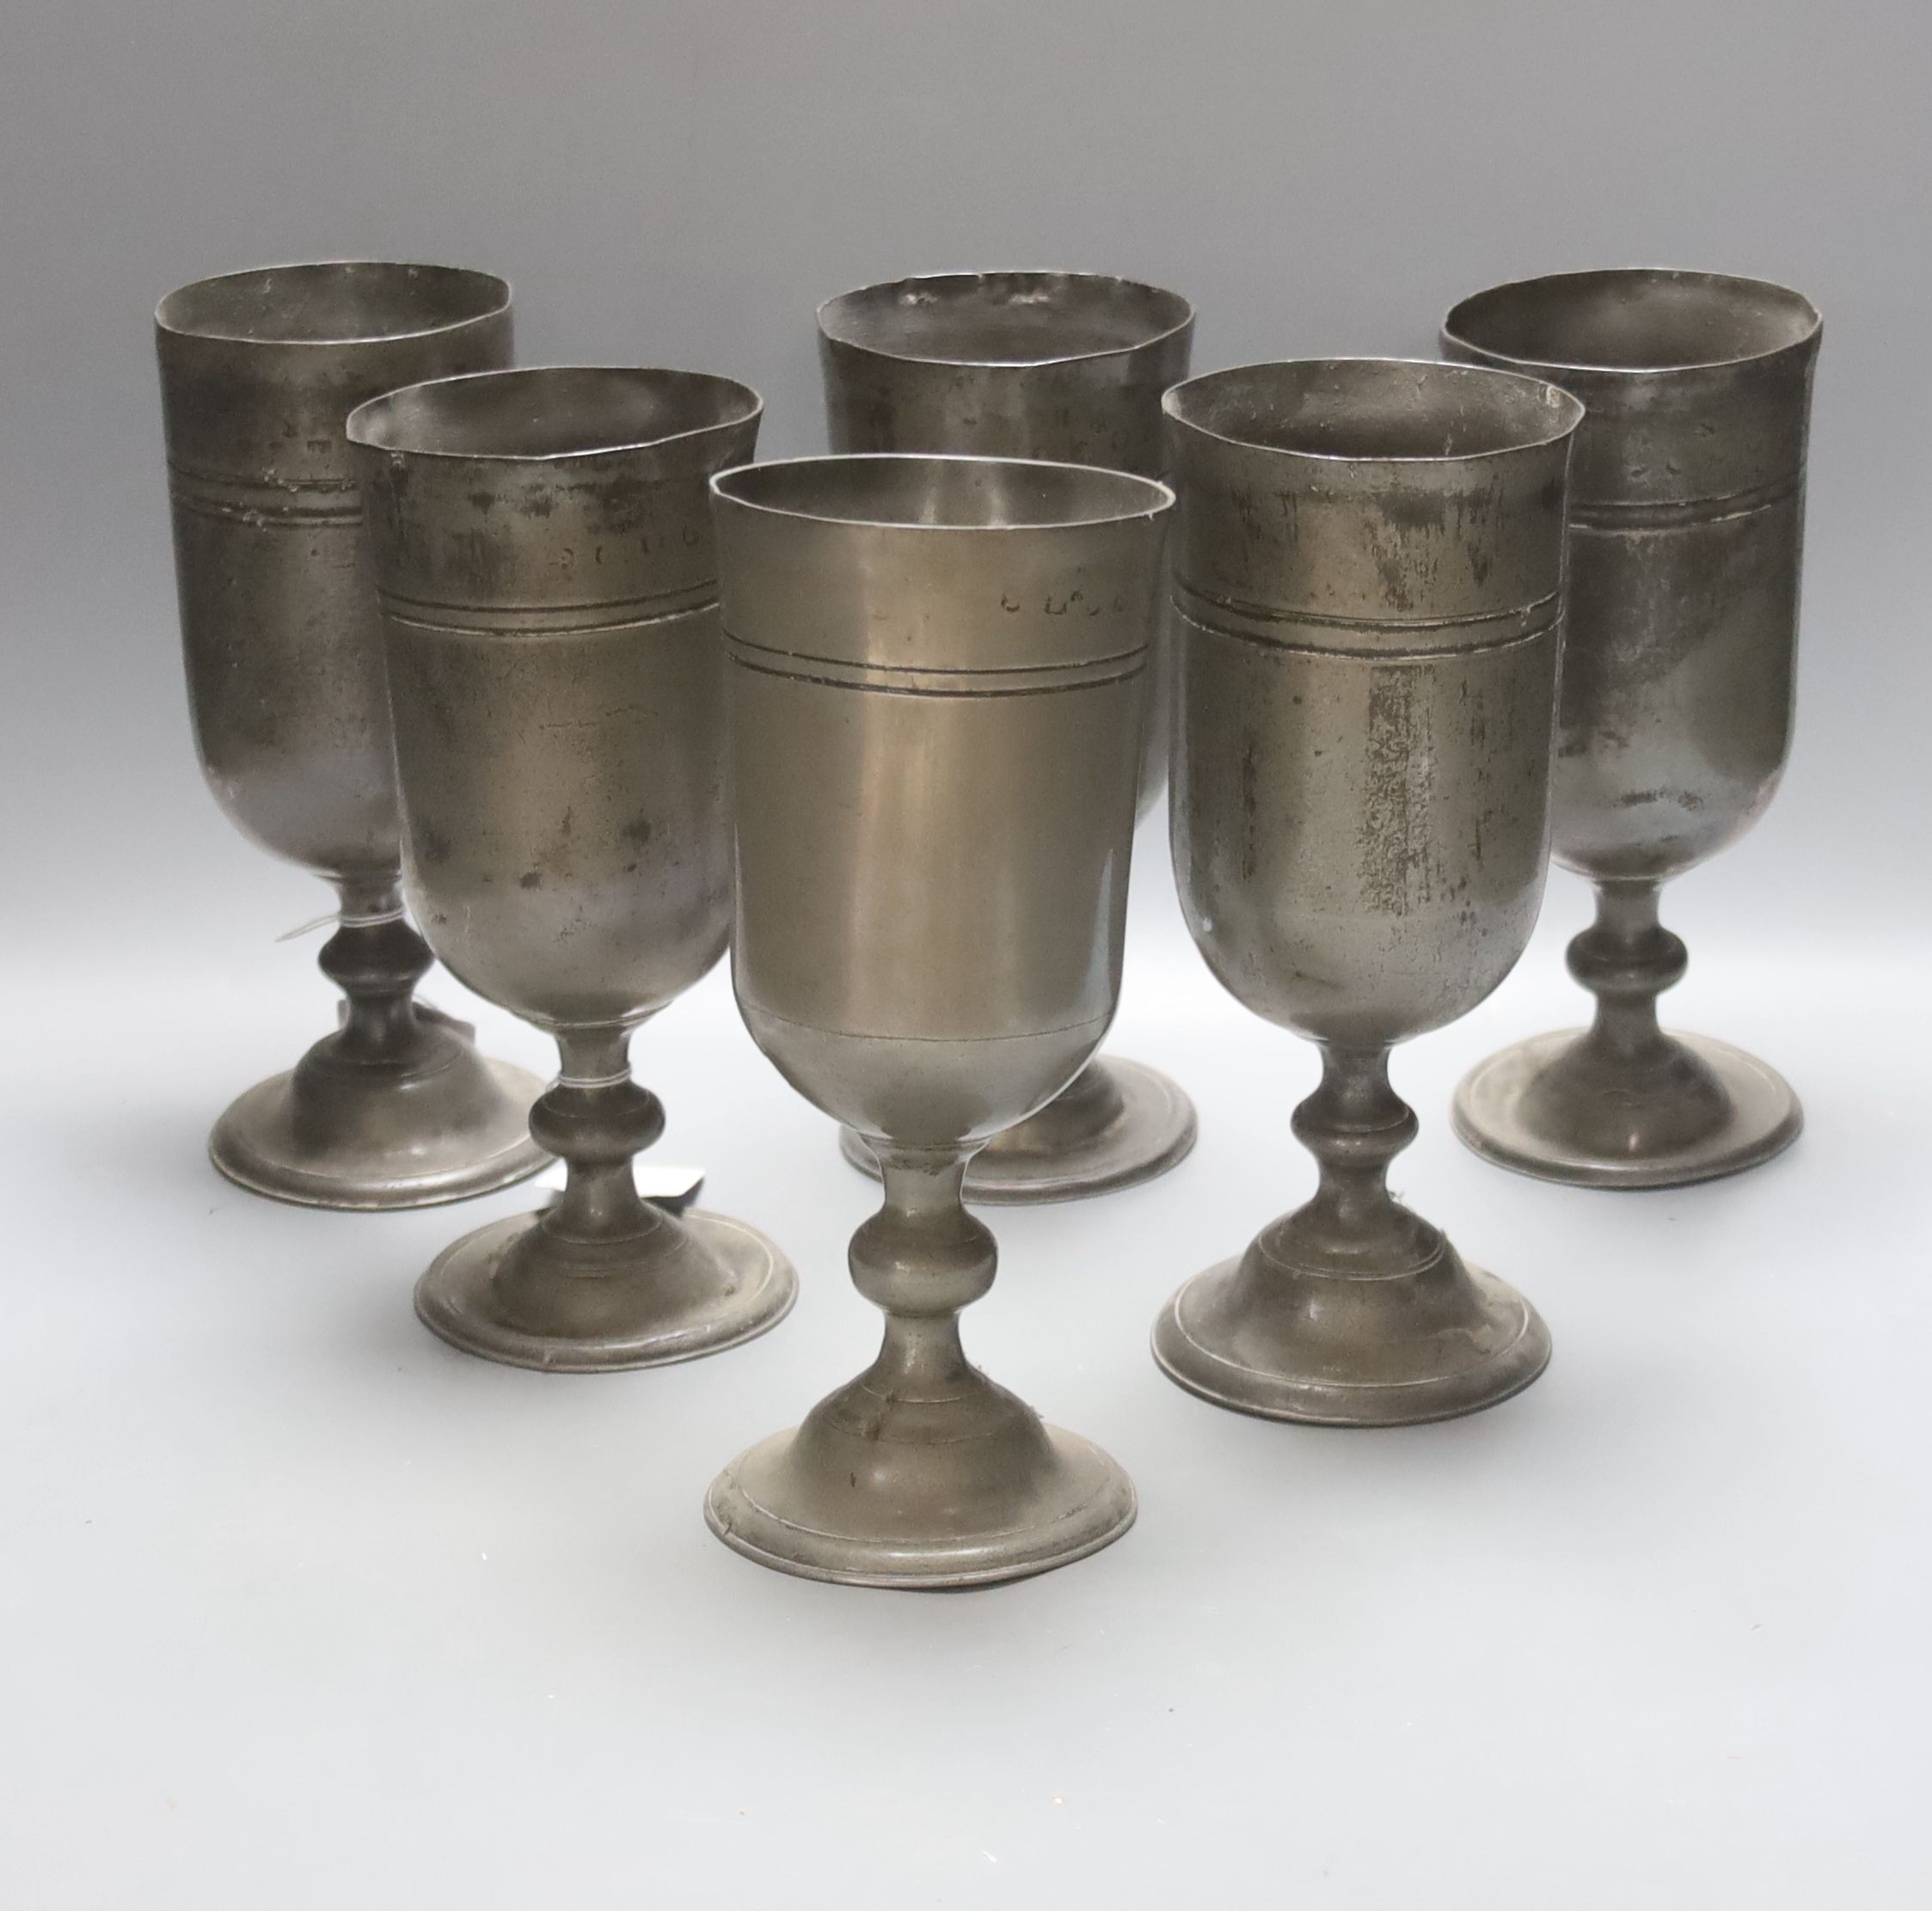 Six various 18th/19th century pewter goblets, worn touchmarks, tallest 12cm